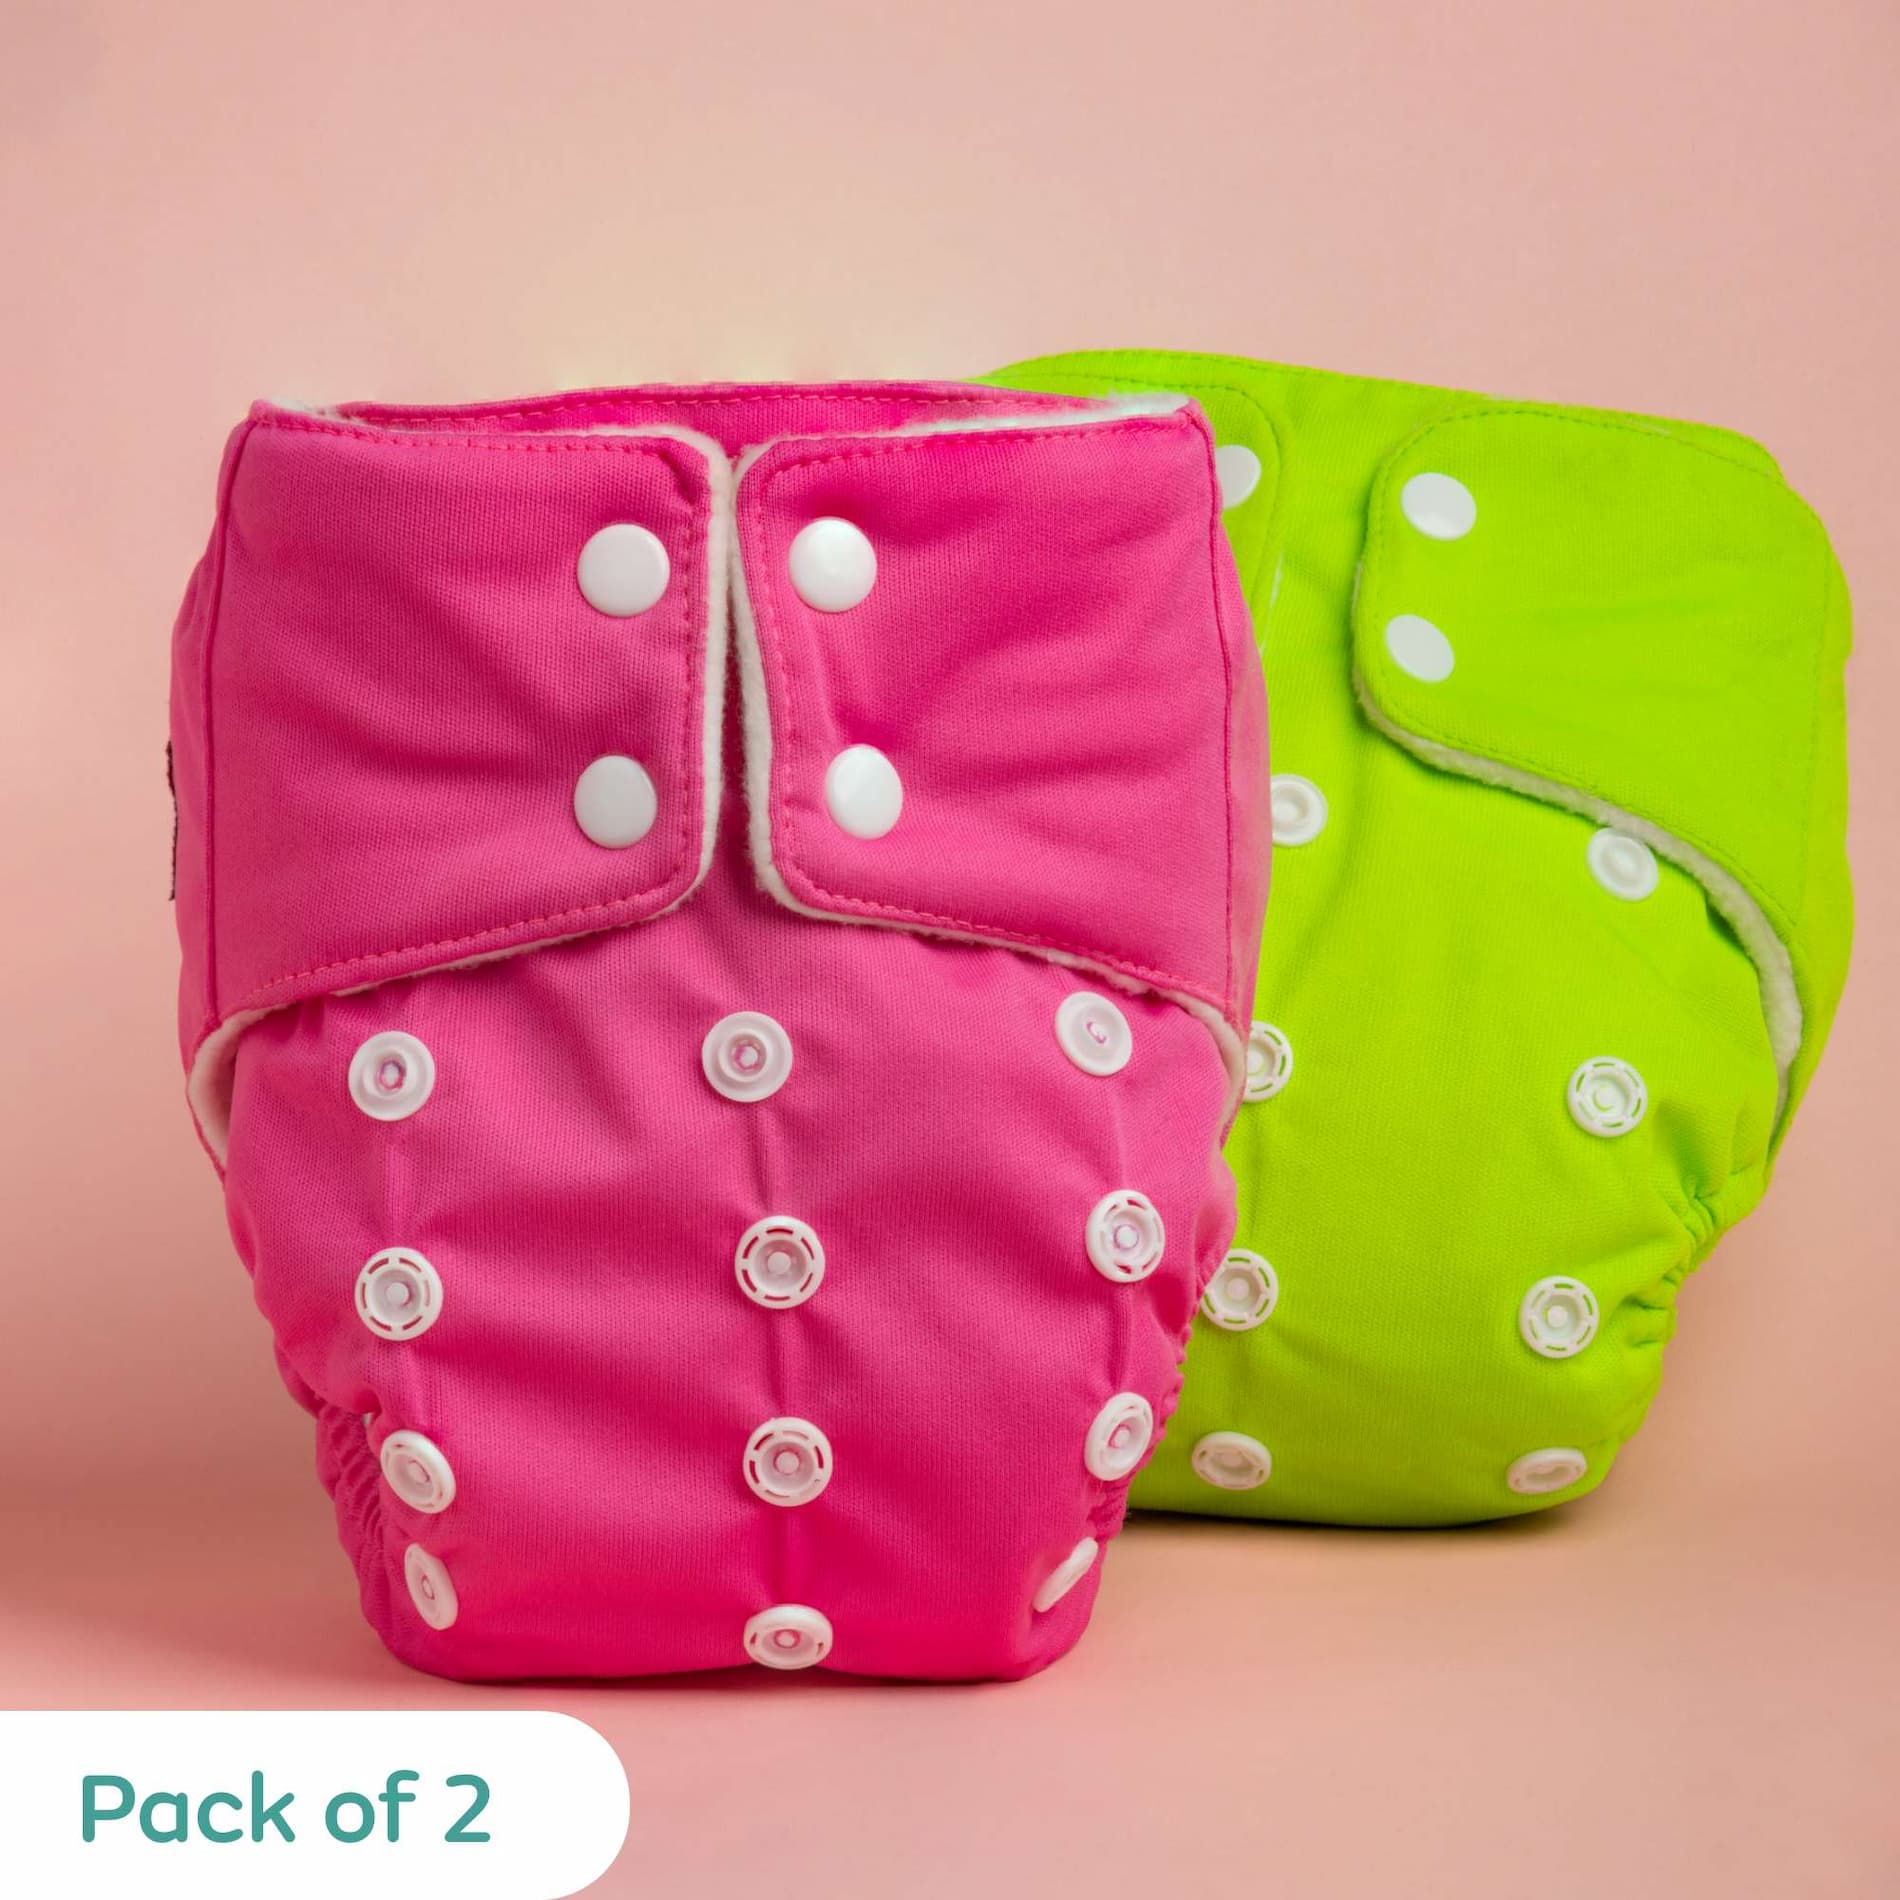 Adjustable Washable & Reusable Cloth Diaper With Dry Feel, Absorbent Insert Pad (3M-3Y)- Pink & Green- Pack of 2